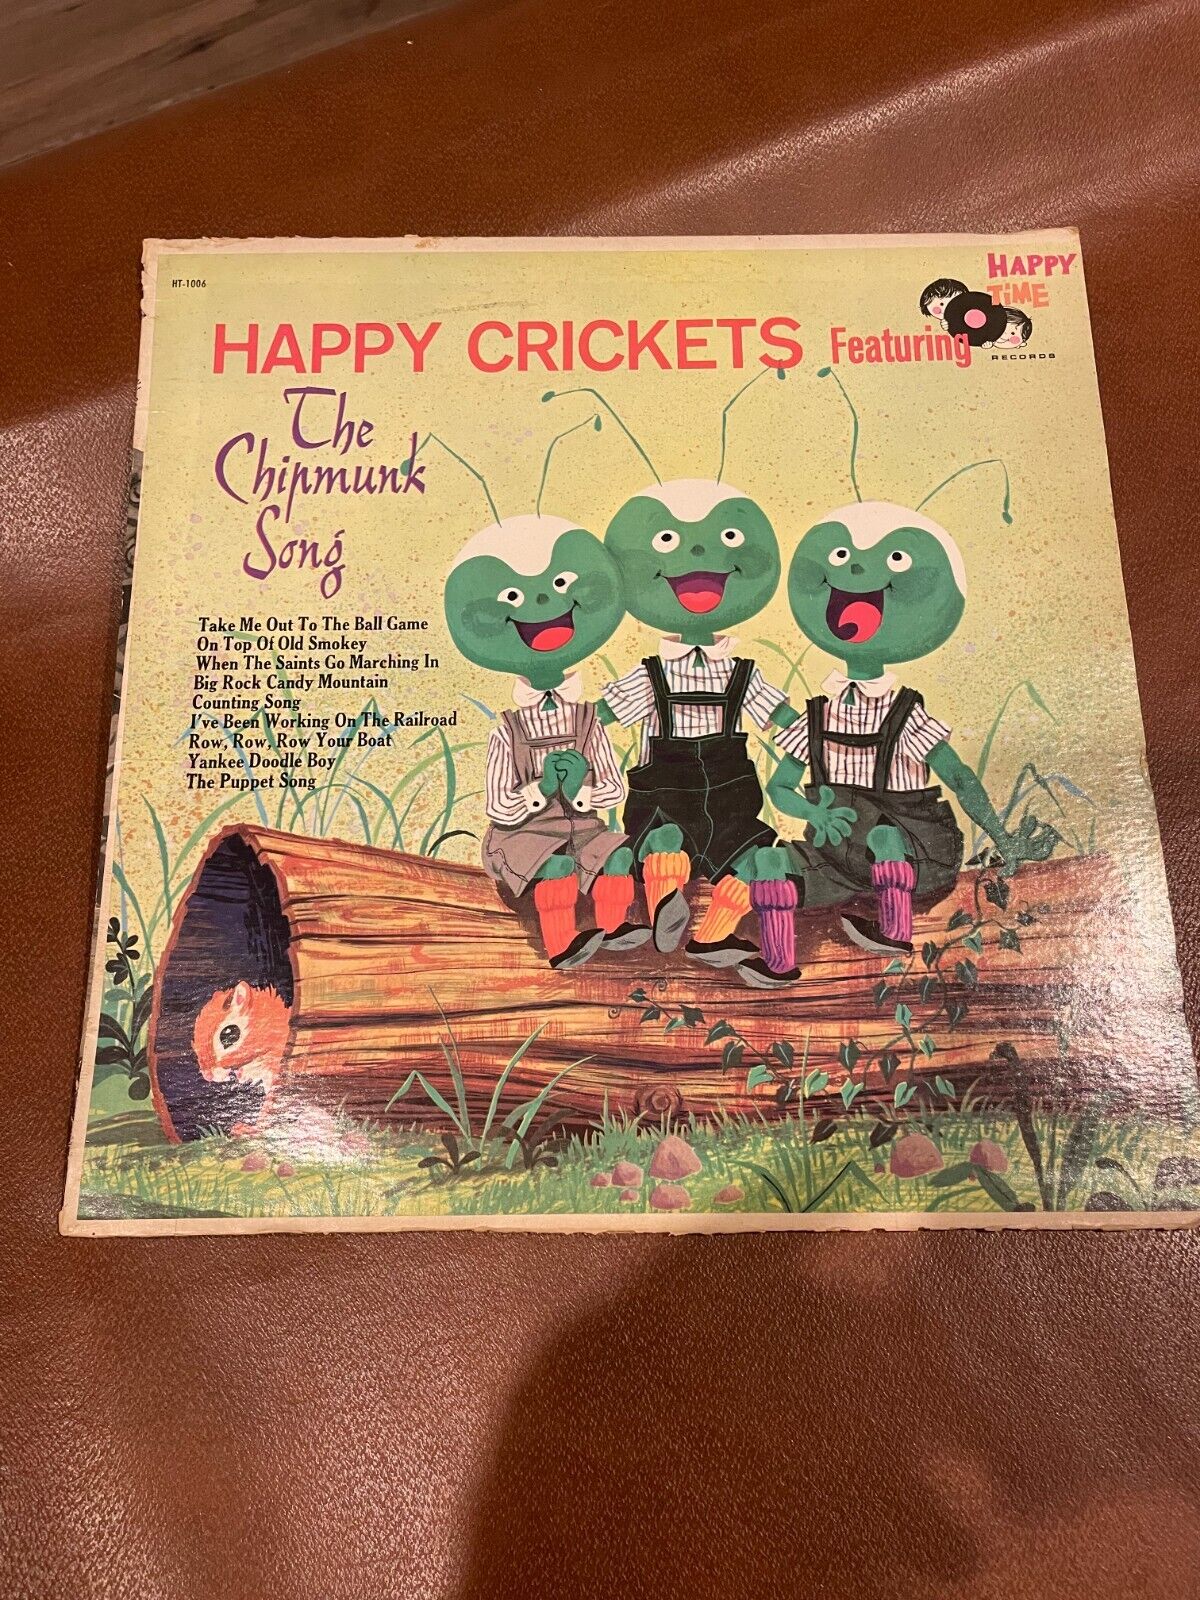 Happy Time Vintage Happy Crickets Vinyl Record Featuring The Chipmunk Song